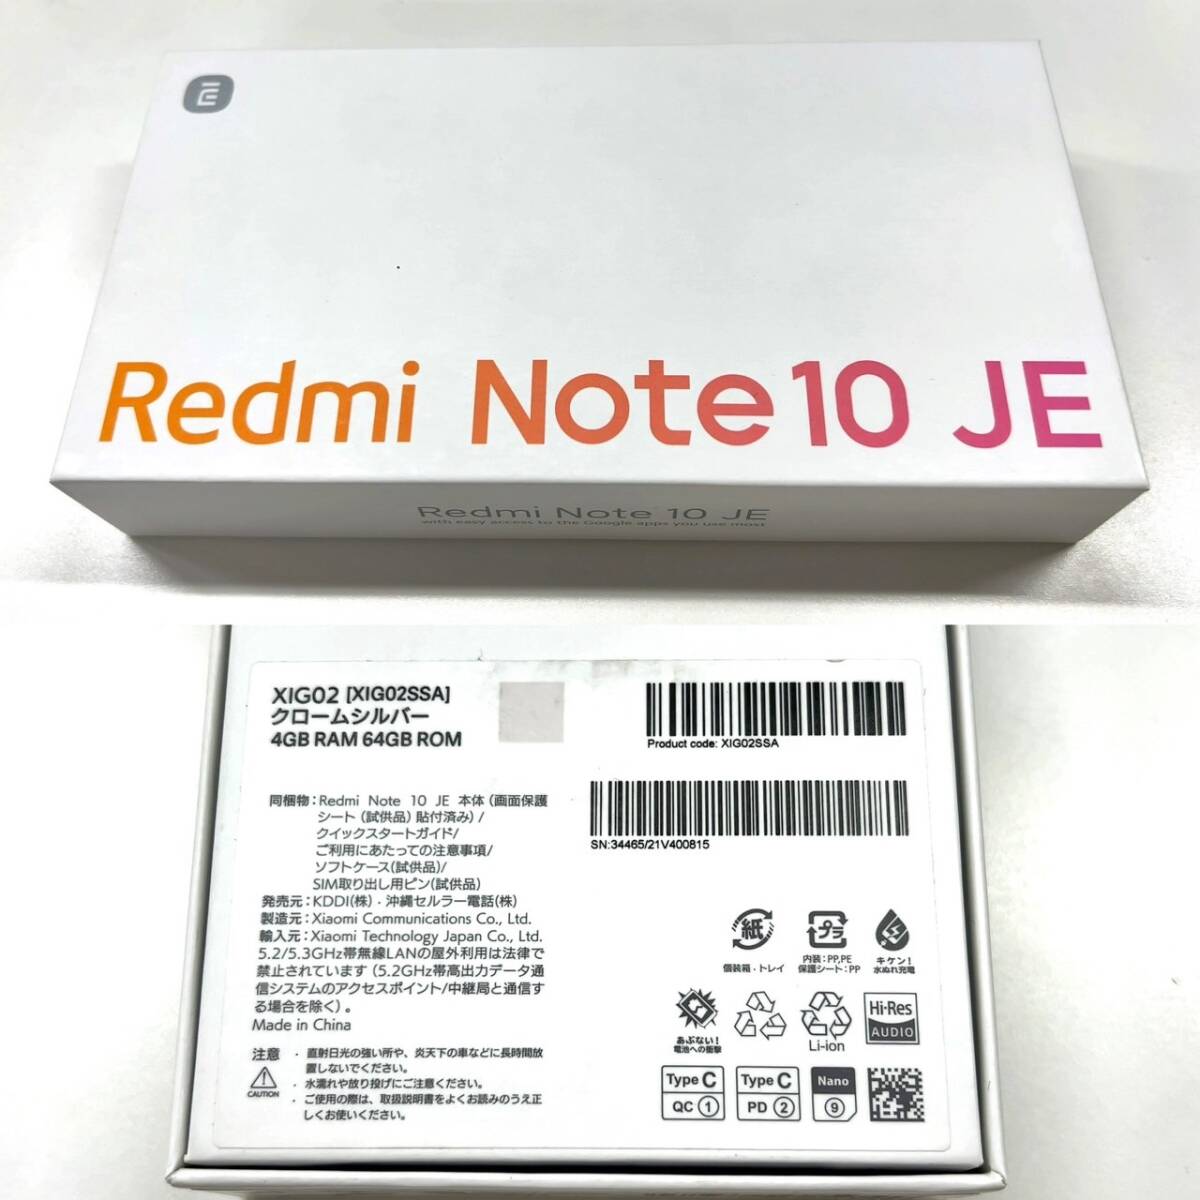 R639-W15-44 ◎ Xiaomi Redmi Note 10JE XIG02 XIG02SSA クロームシルバー Android one スマートフォン スマホ 初期化済み 通電確認済み③の画像8